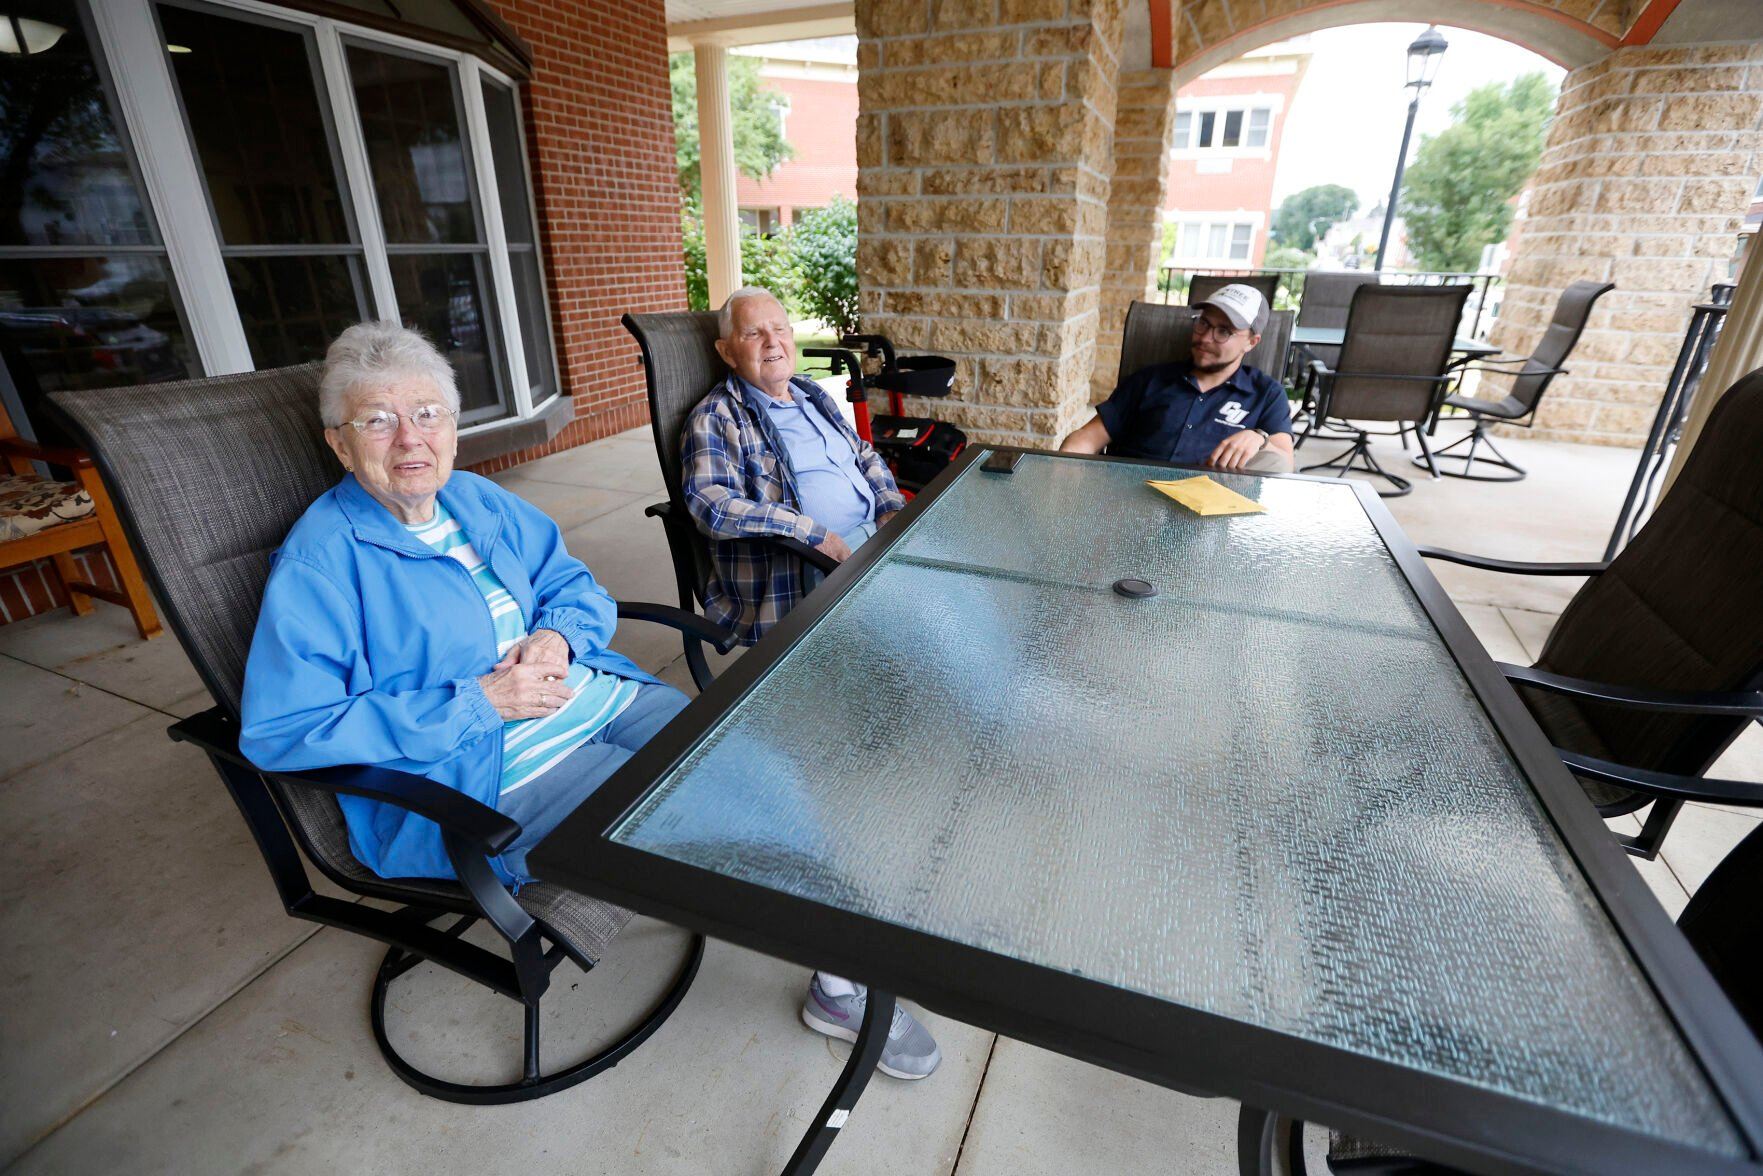 Mary Theisen (from left), Joe MacDonald and Ben MacDonald talk outside Bethany Home in Dubuque.    PHOTO CREDIT: JESSICA REILLY
Telegraph Herald